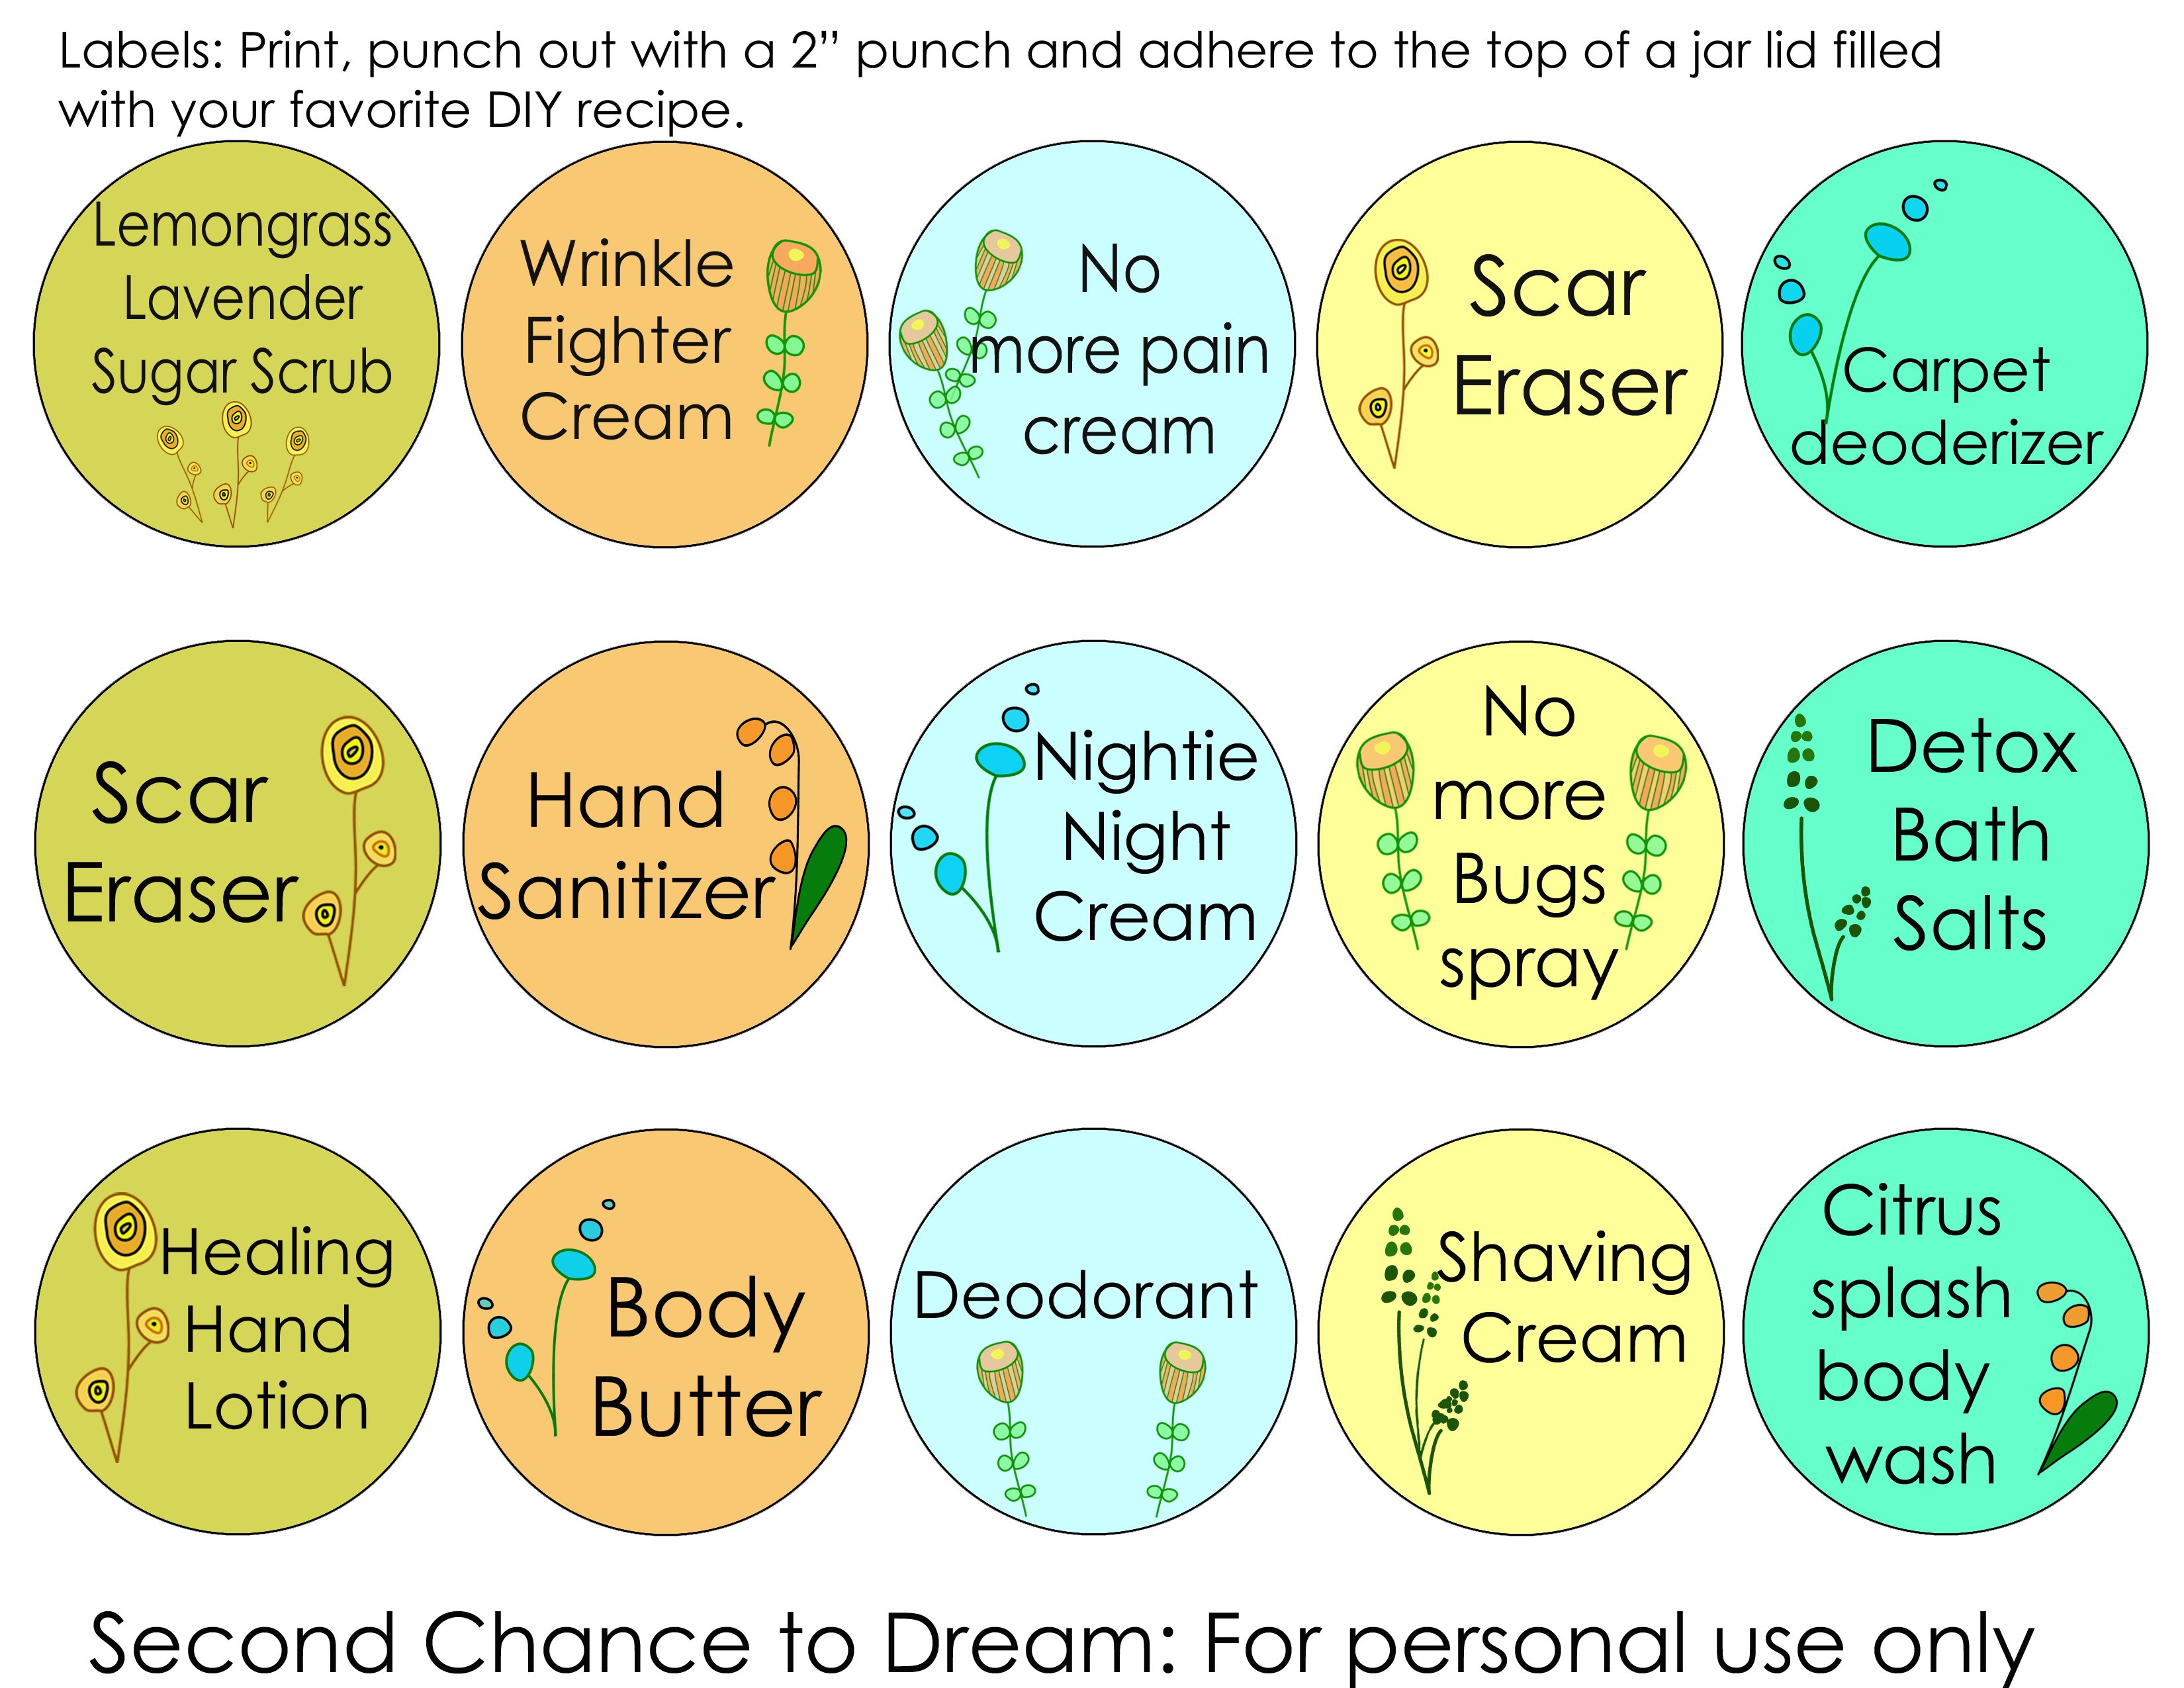 Second Chance to Dream: Essential Oil labels